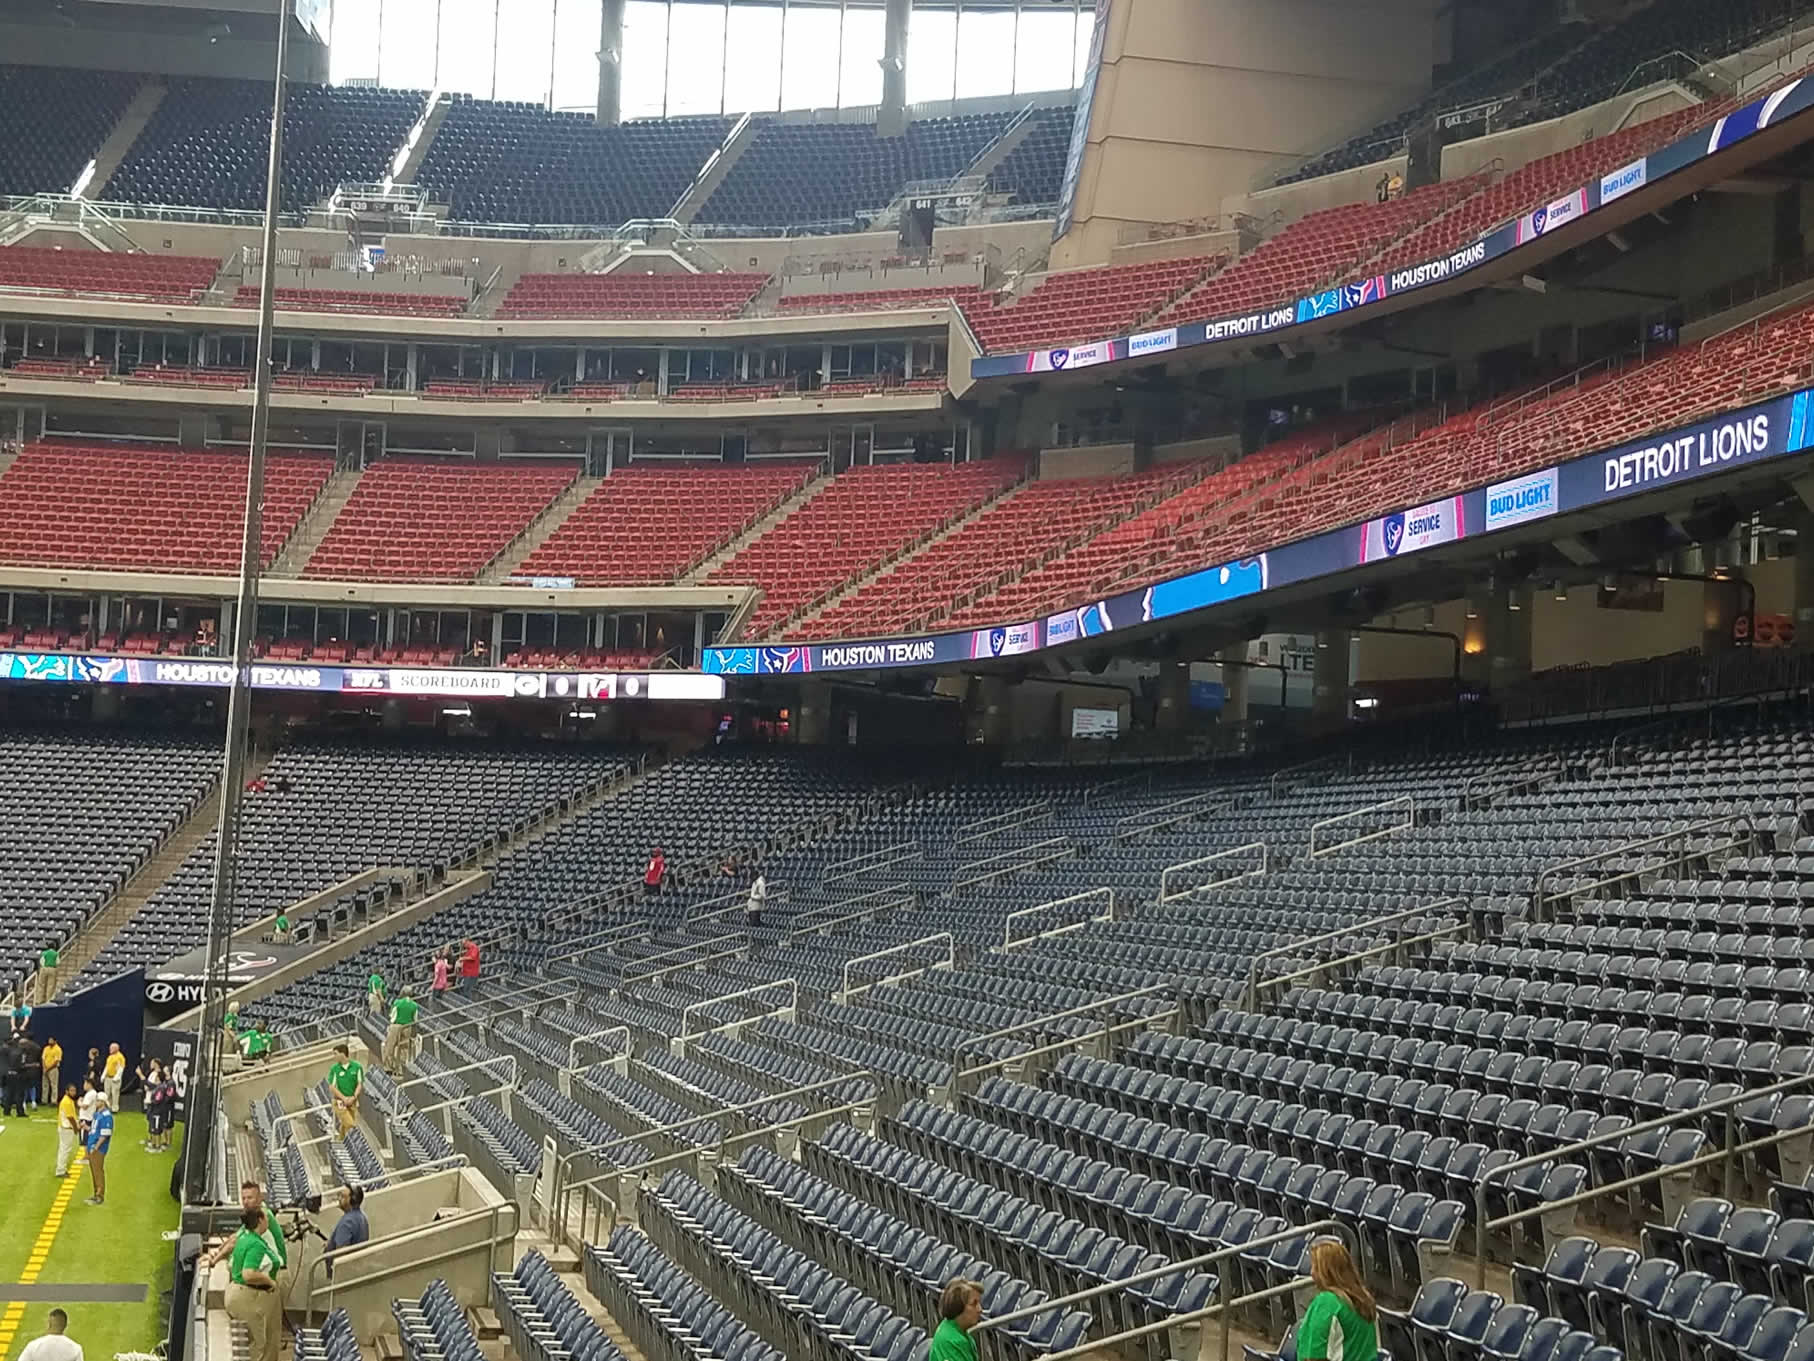 sections 135-138